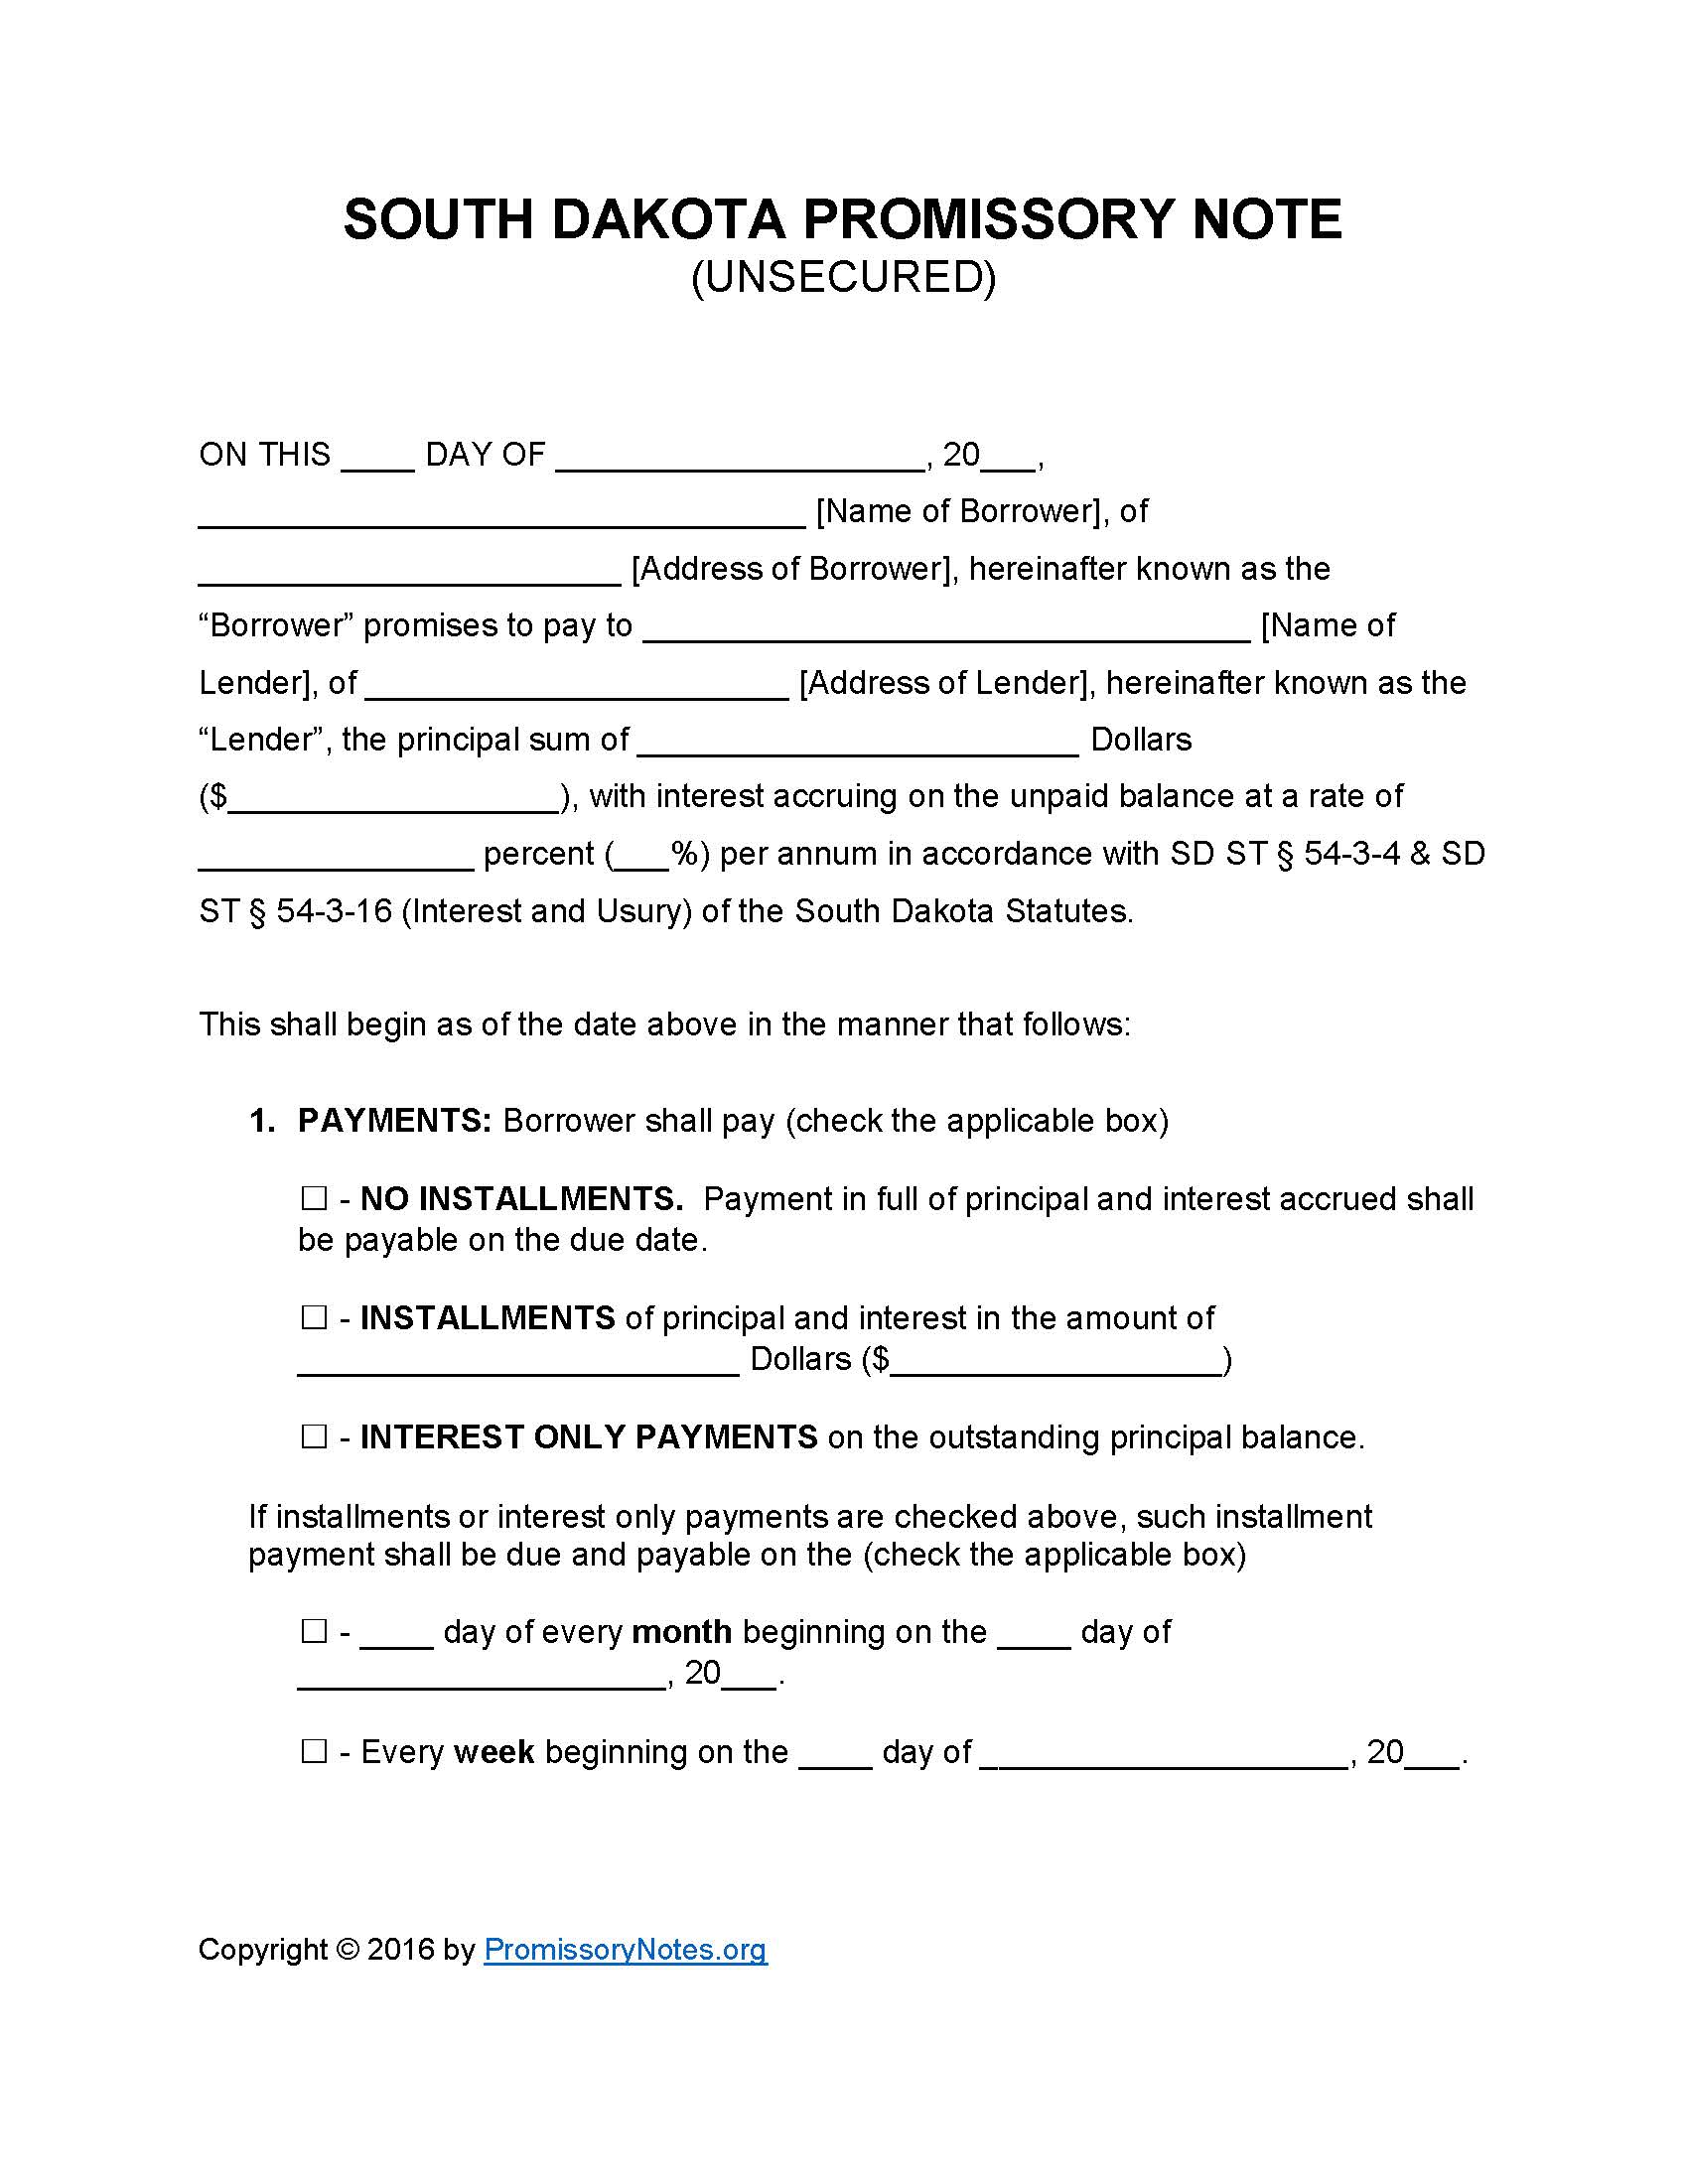 south-dakota-unsecured-promissory-note-form